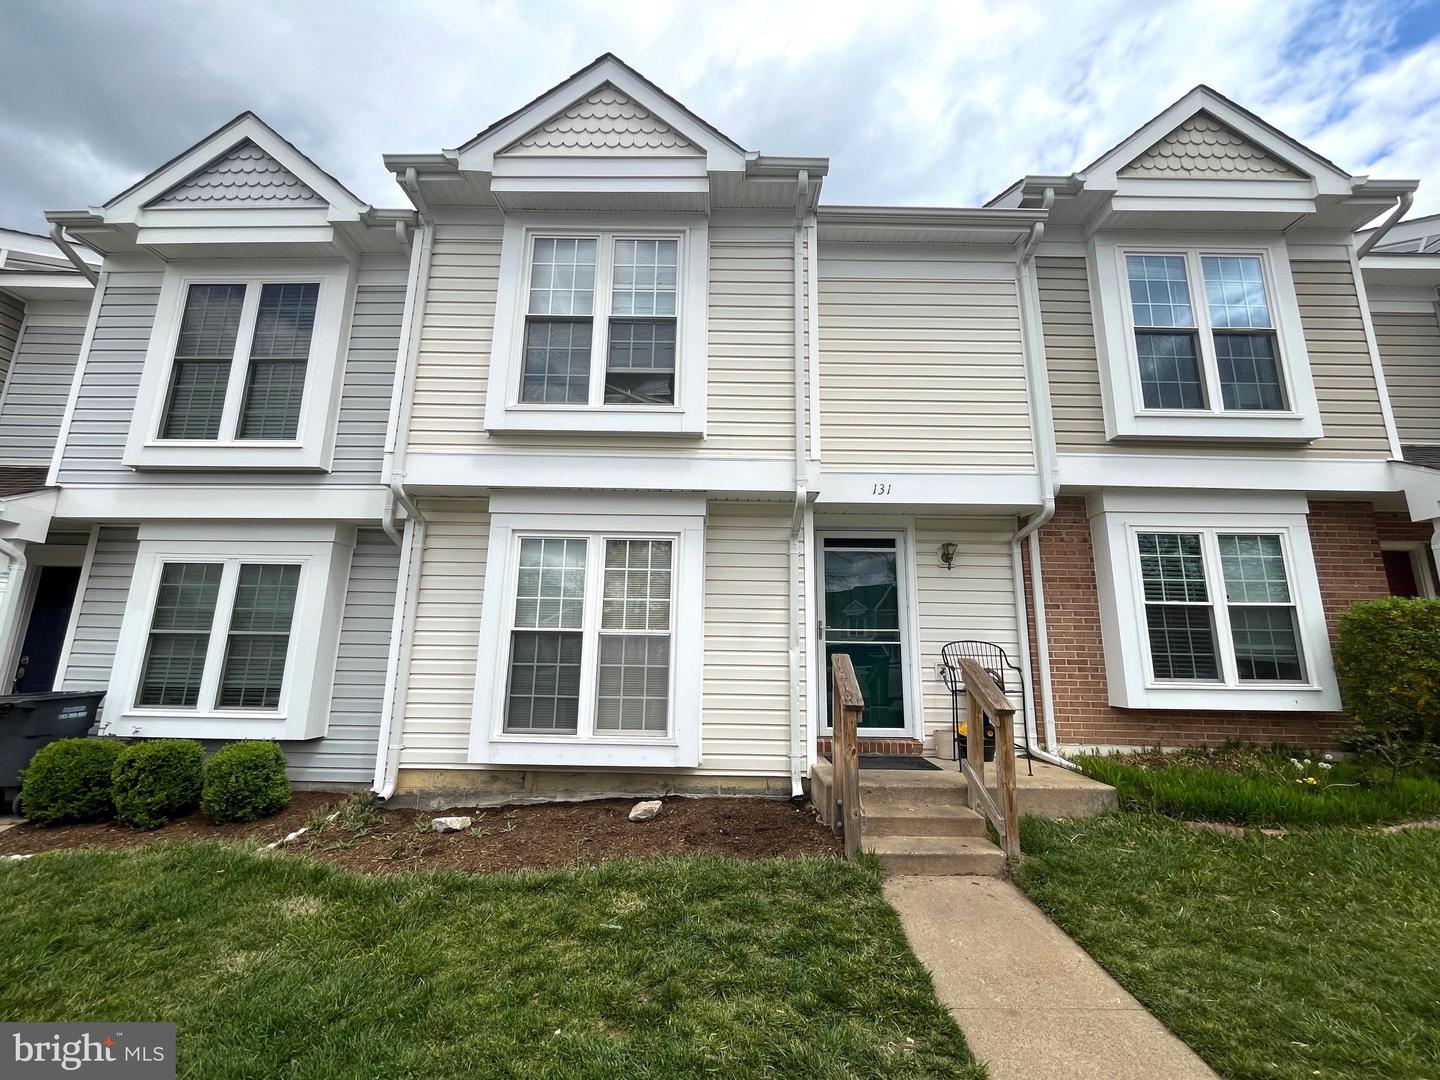 View Sterling, VA 20164 townhome